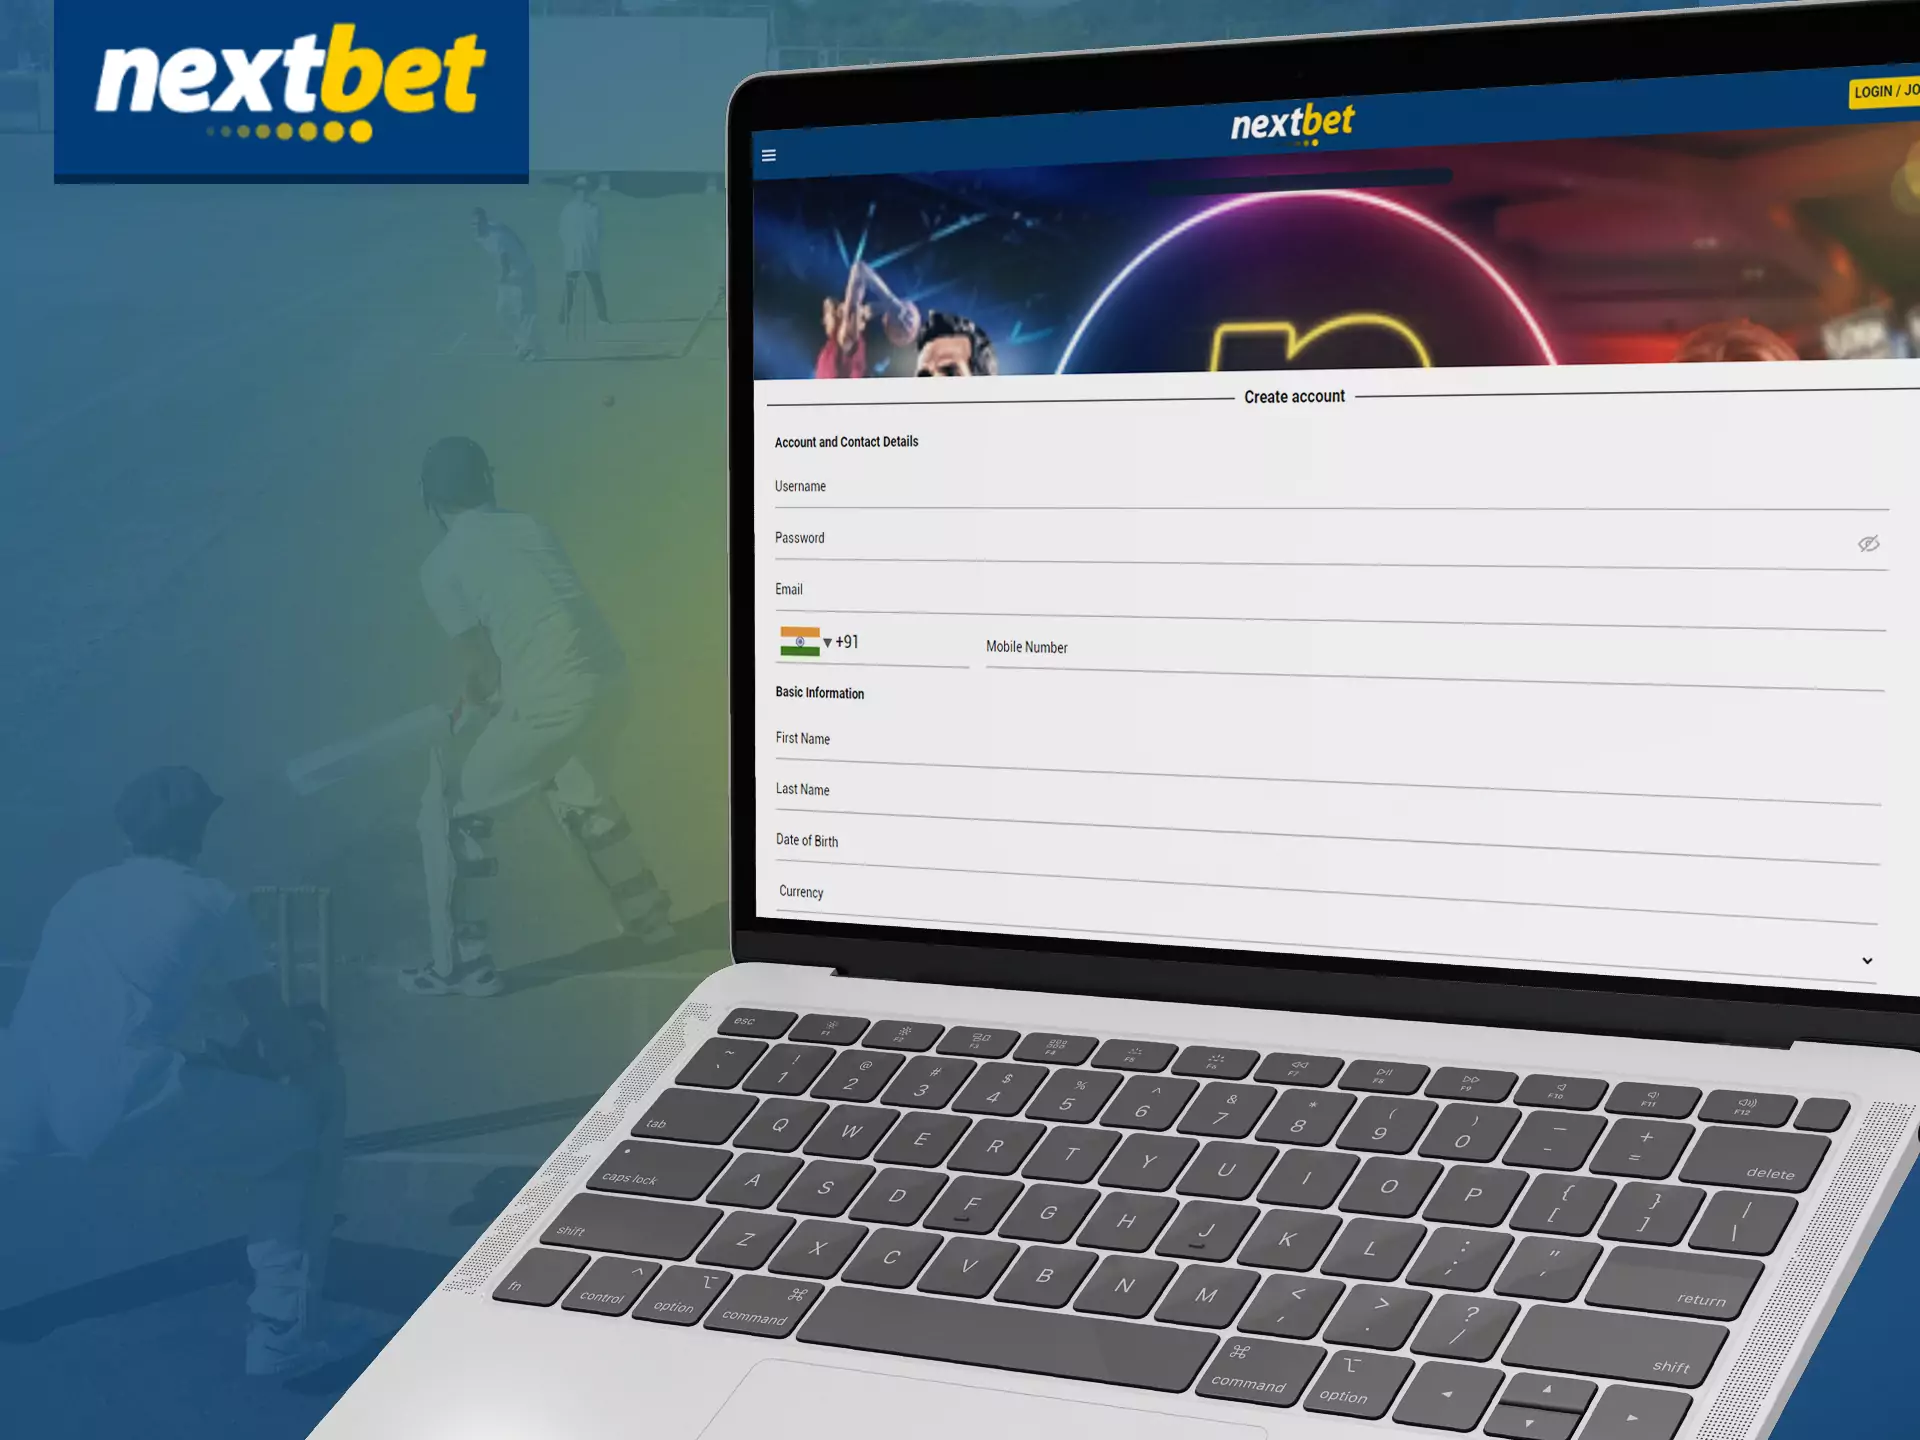 Go through a simple and quick registration on Nextbet, get access to all bonuses.